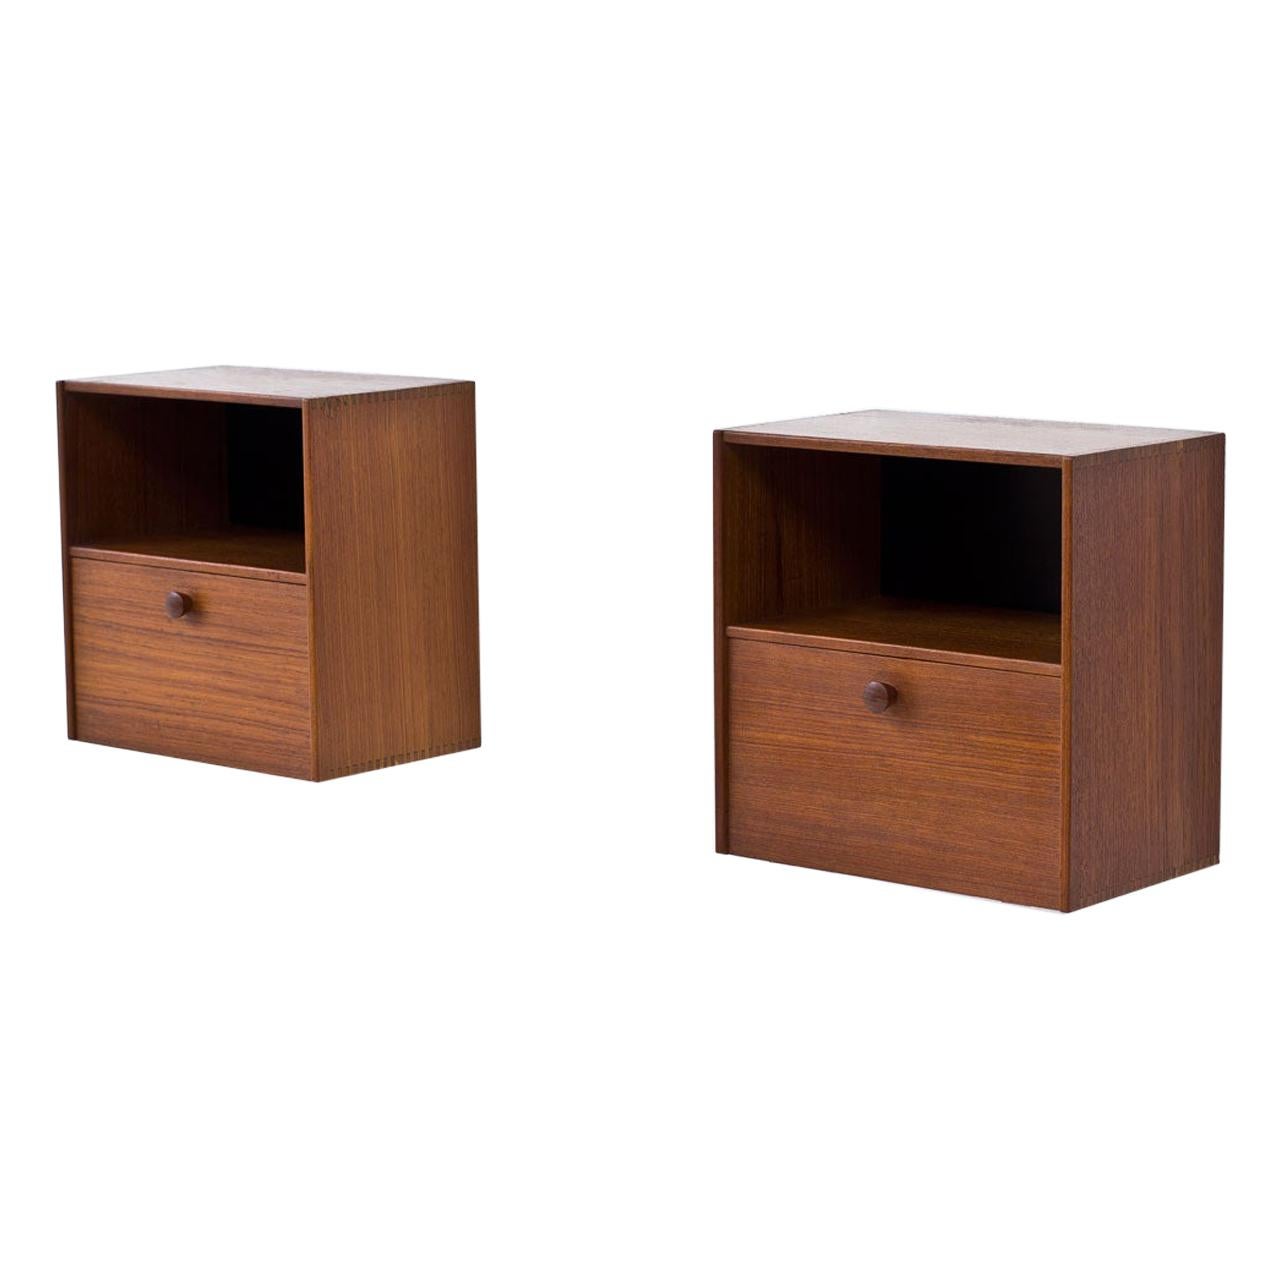 1950s Teak Wall-Mounted Night Stands by Troeds, Sweden